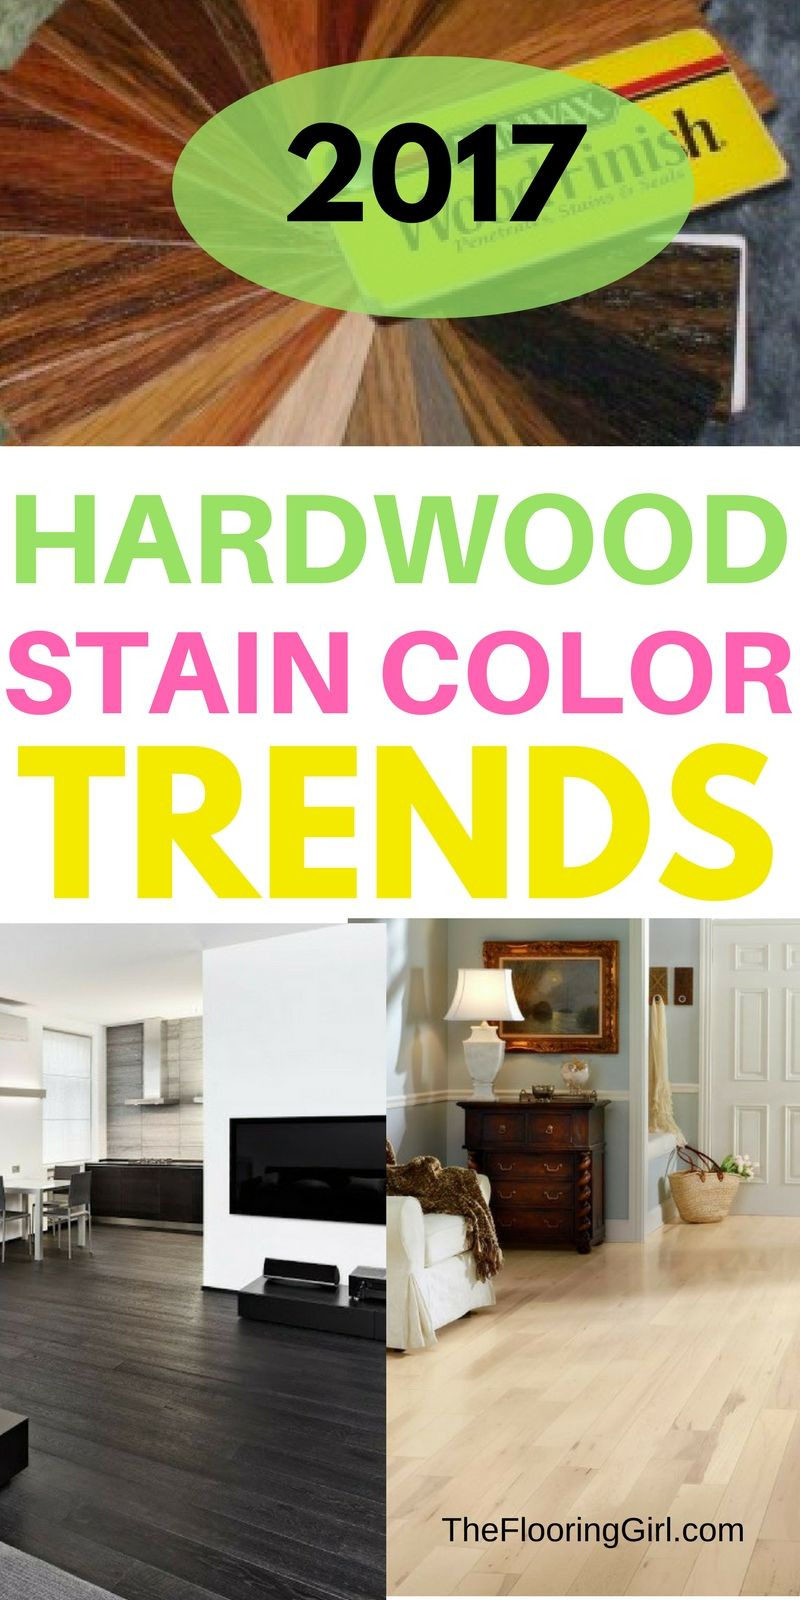 22 Cute Hardwood Floor Paper 2024 free download hardwood floor paper of hardwood flooring stain color trends 2018 more from the flooring pertaining to hardwood flooring stain color trends for 2017 hardwood colors that are in style thefloo